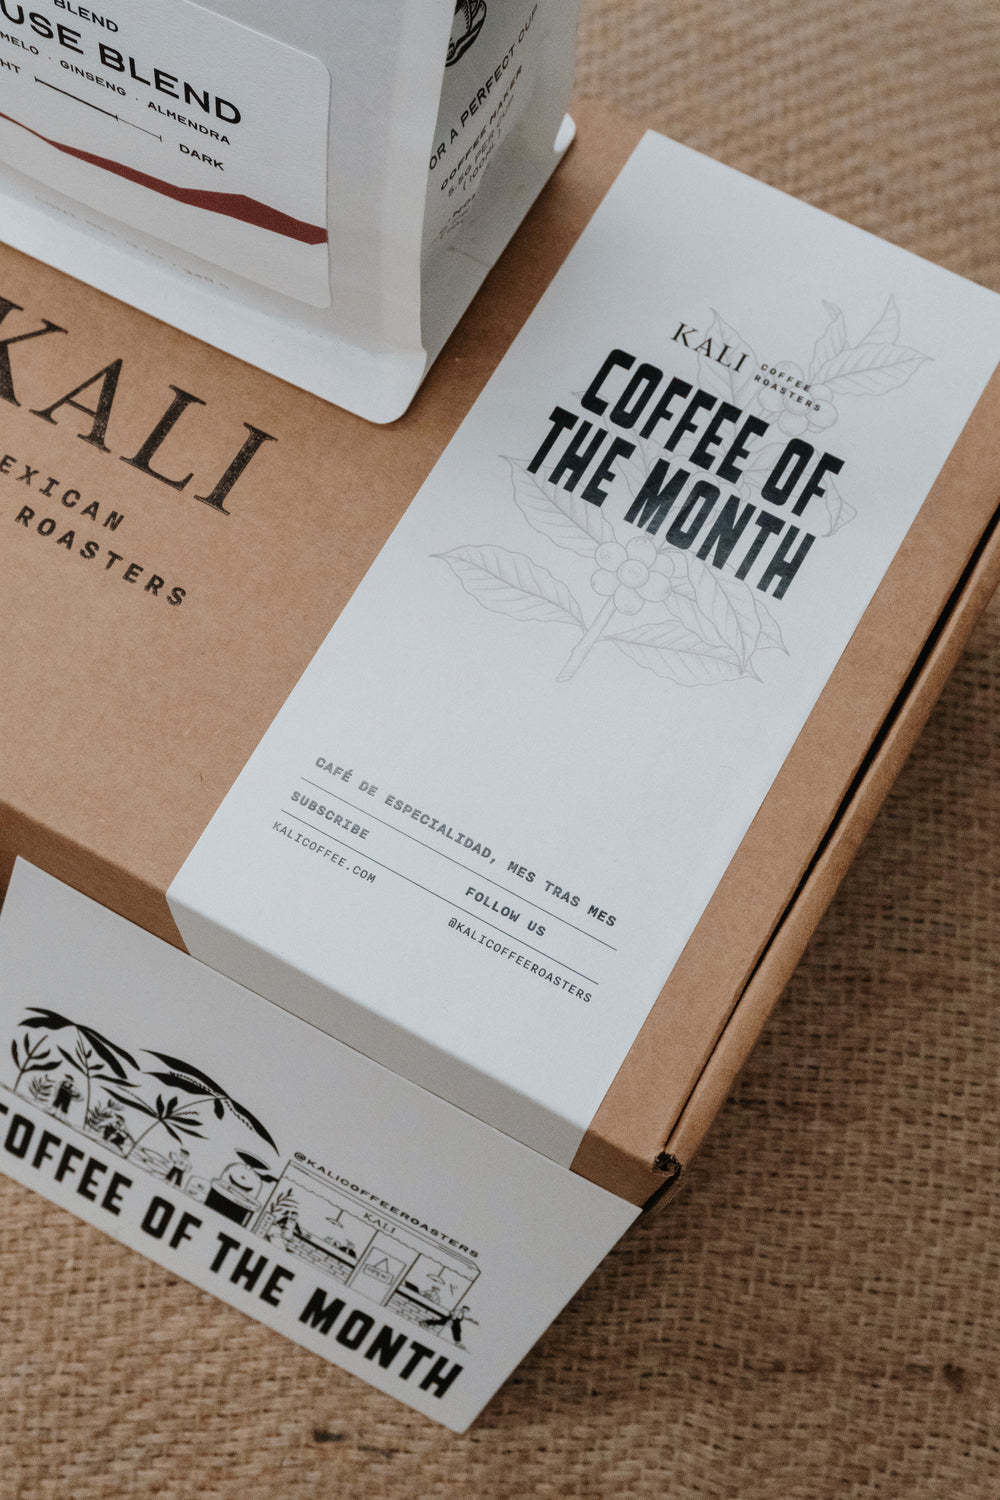 Mensualidad Coffee of the Month